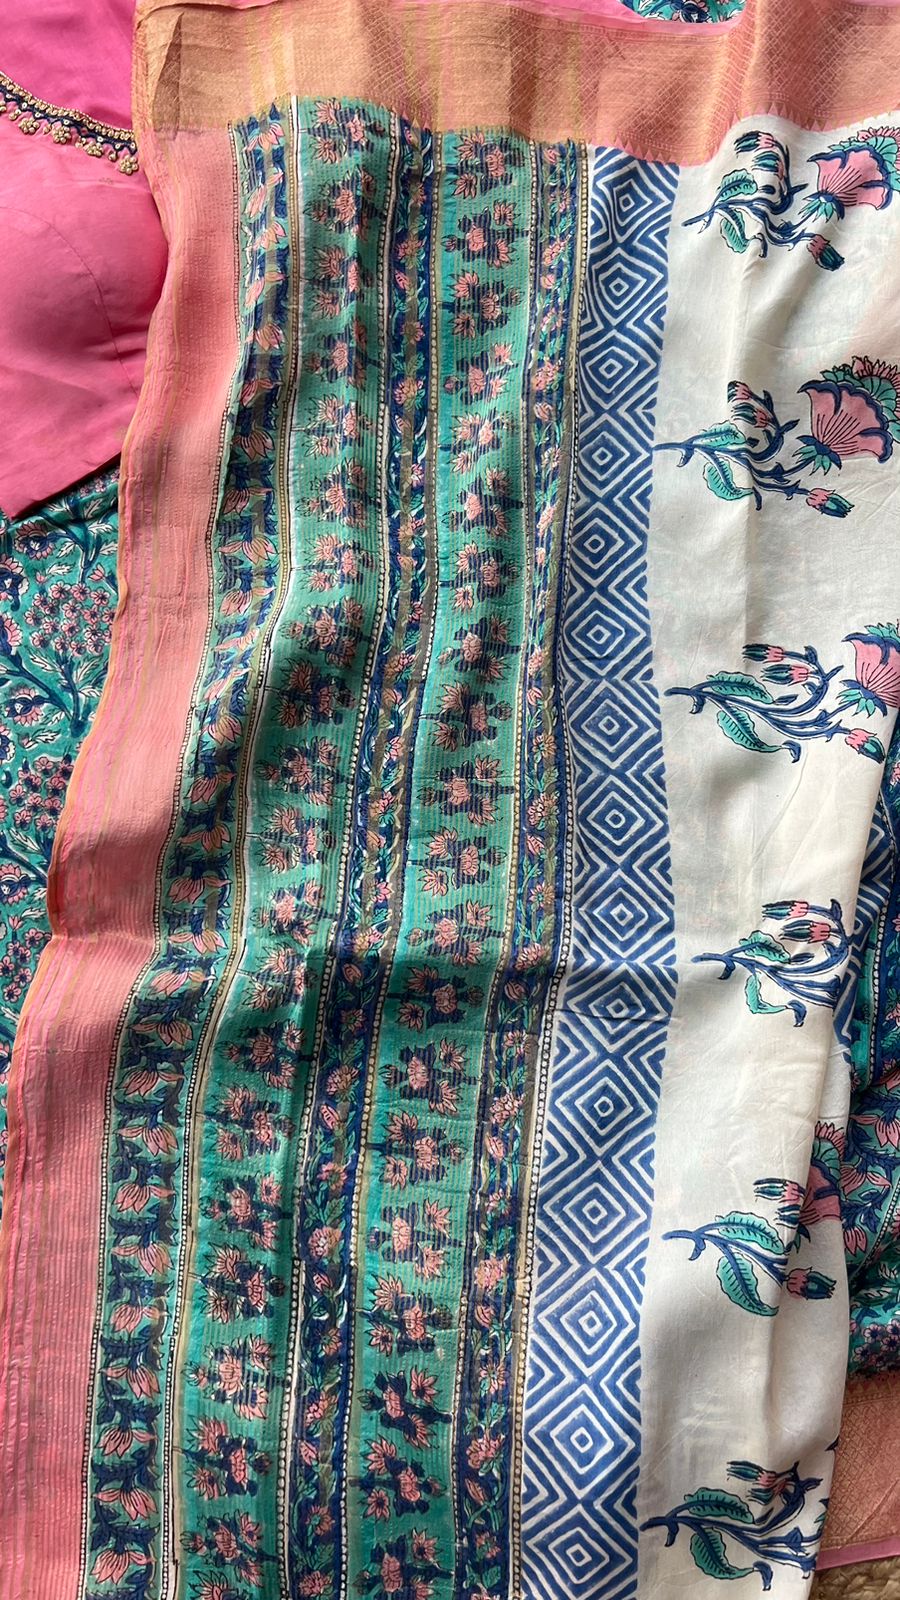 Aqua blue chanderi saree with pink hand worked blouse